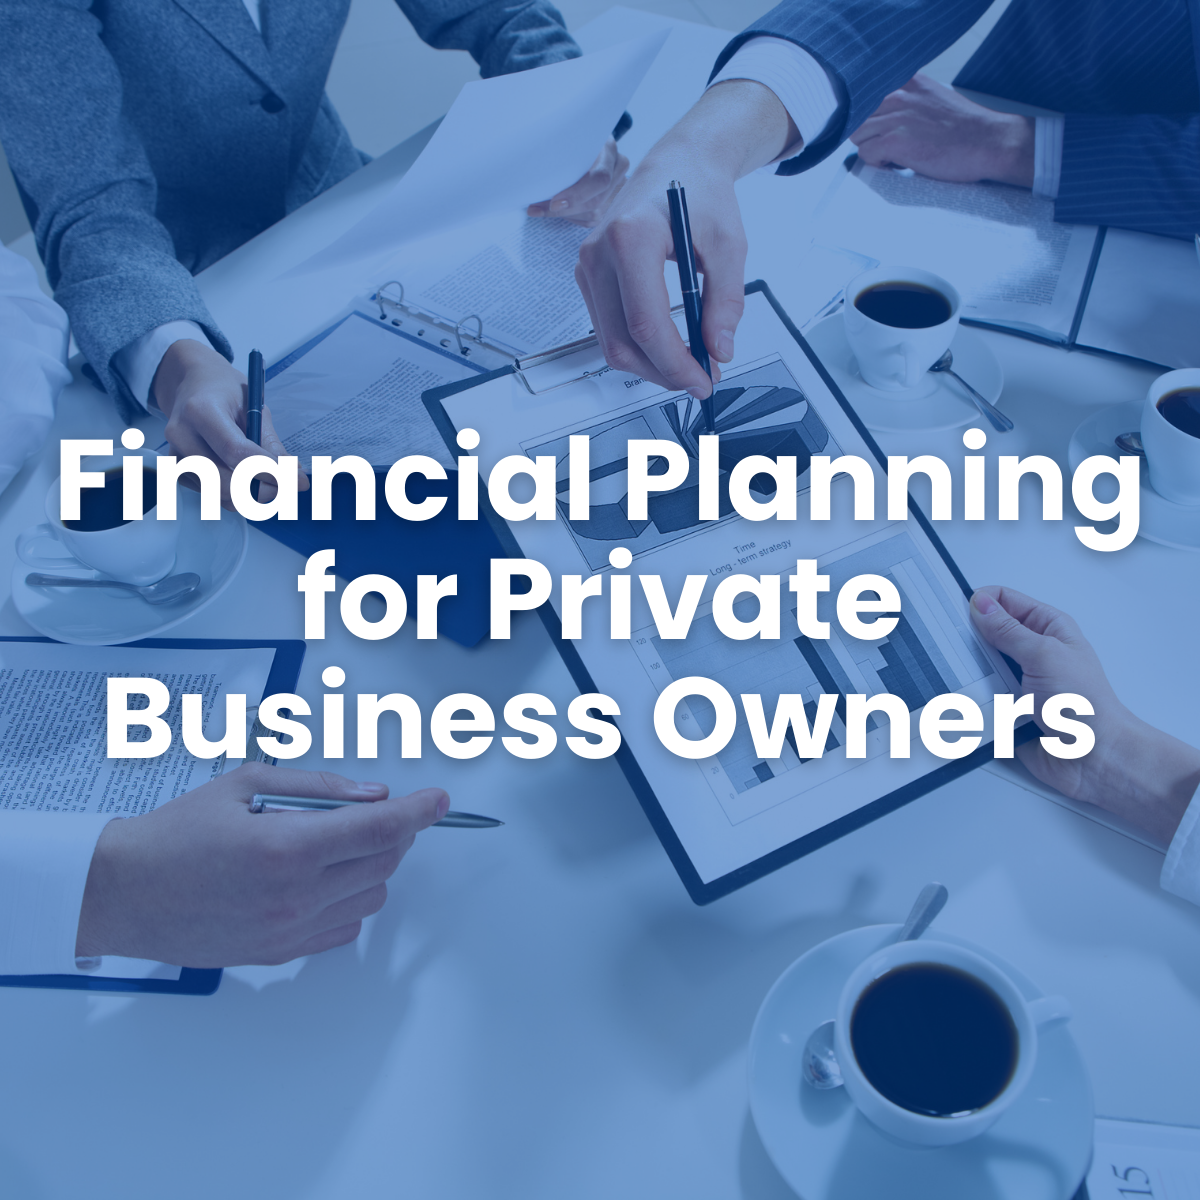 Financial Planning for Private Business Owners